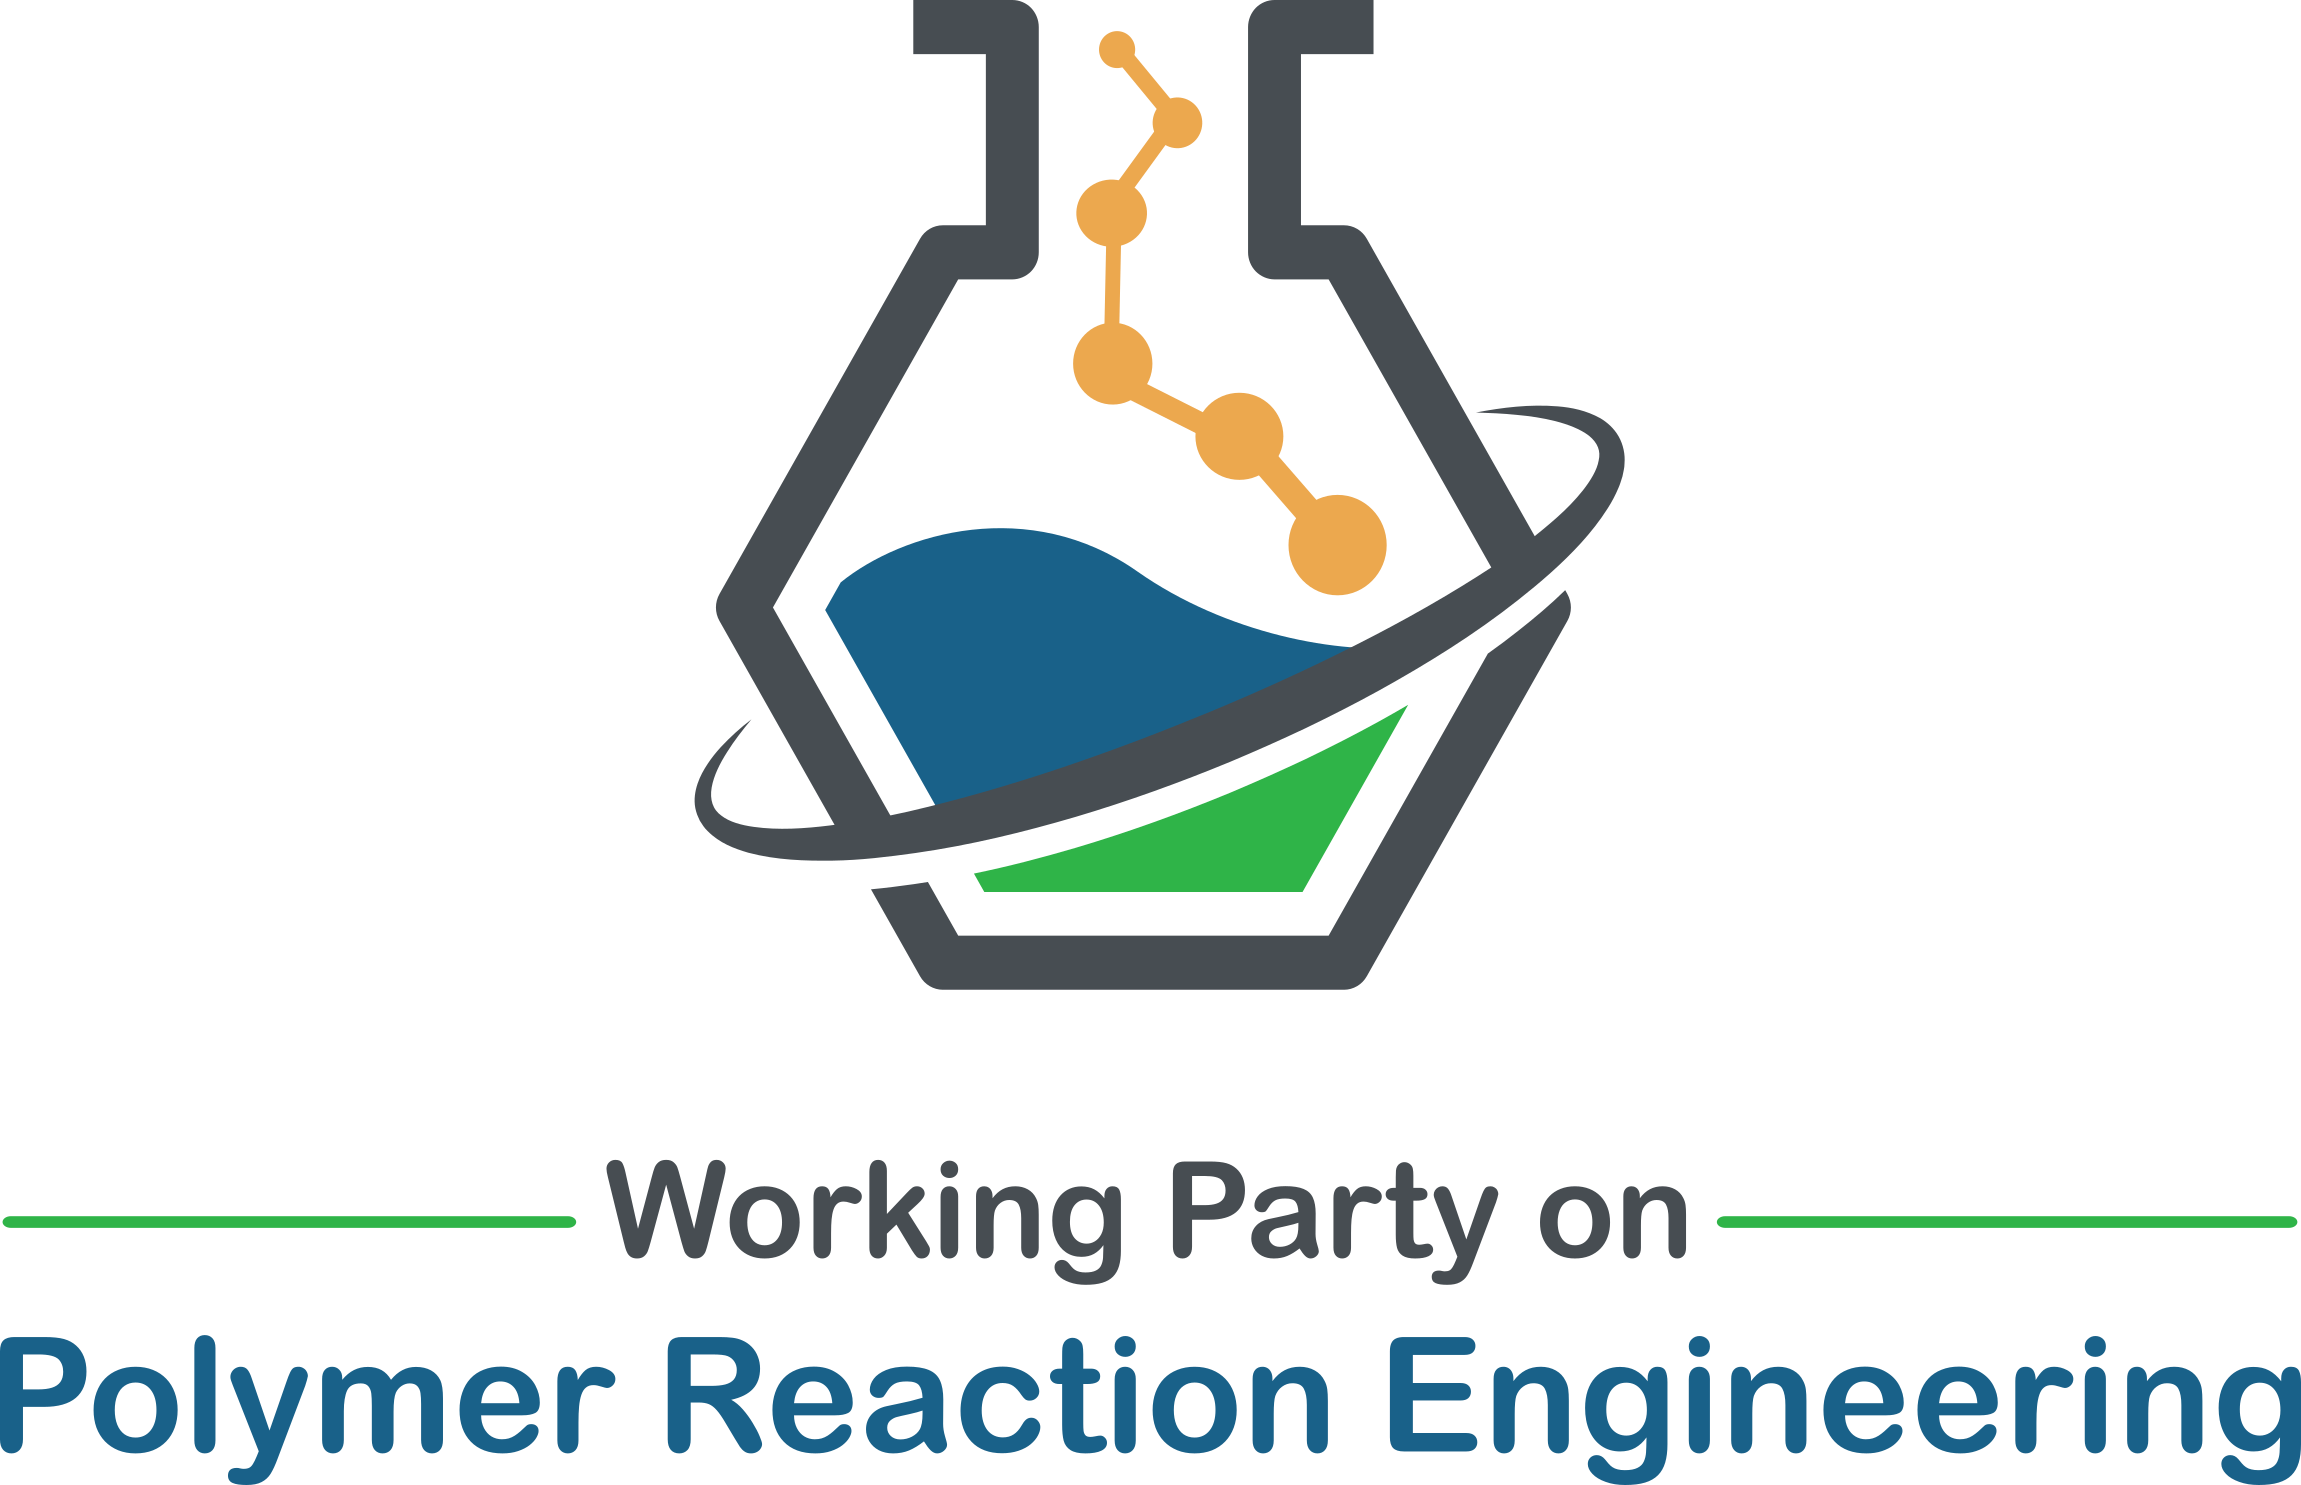 12th PhD-Student Workshop on Polymer Reaction Engineering